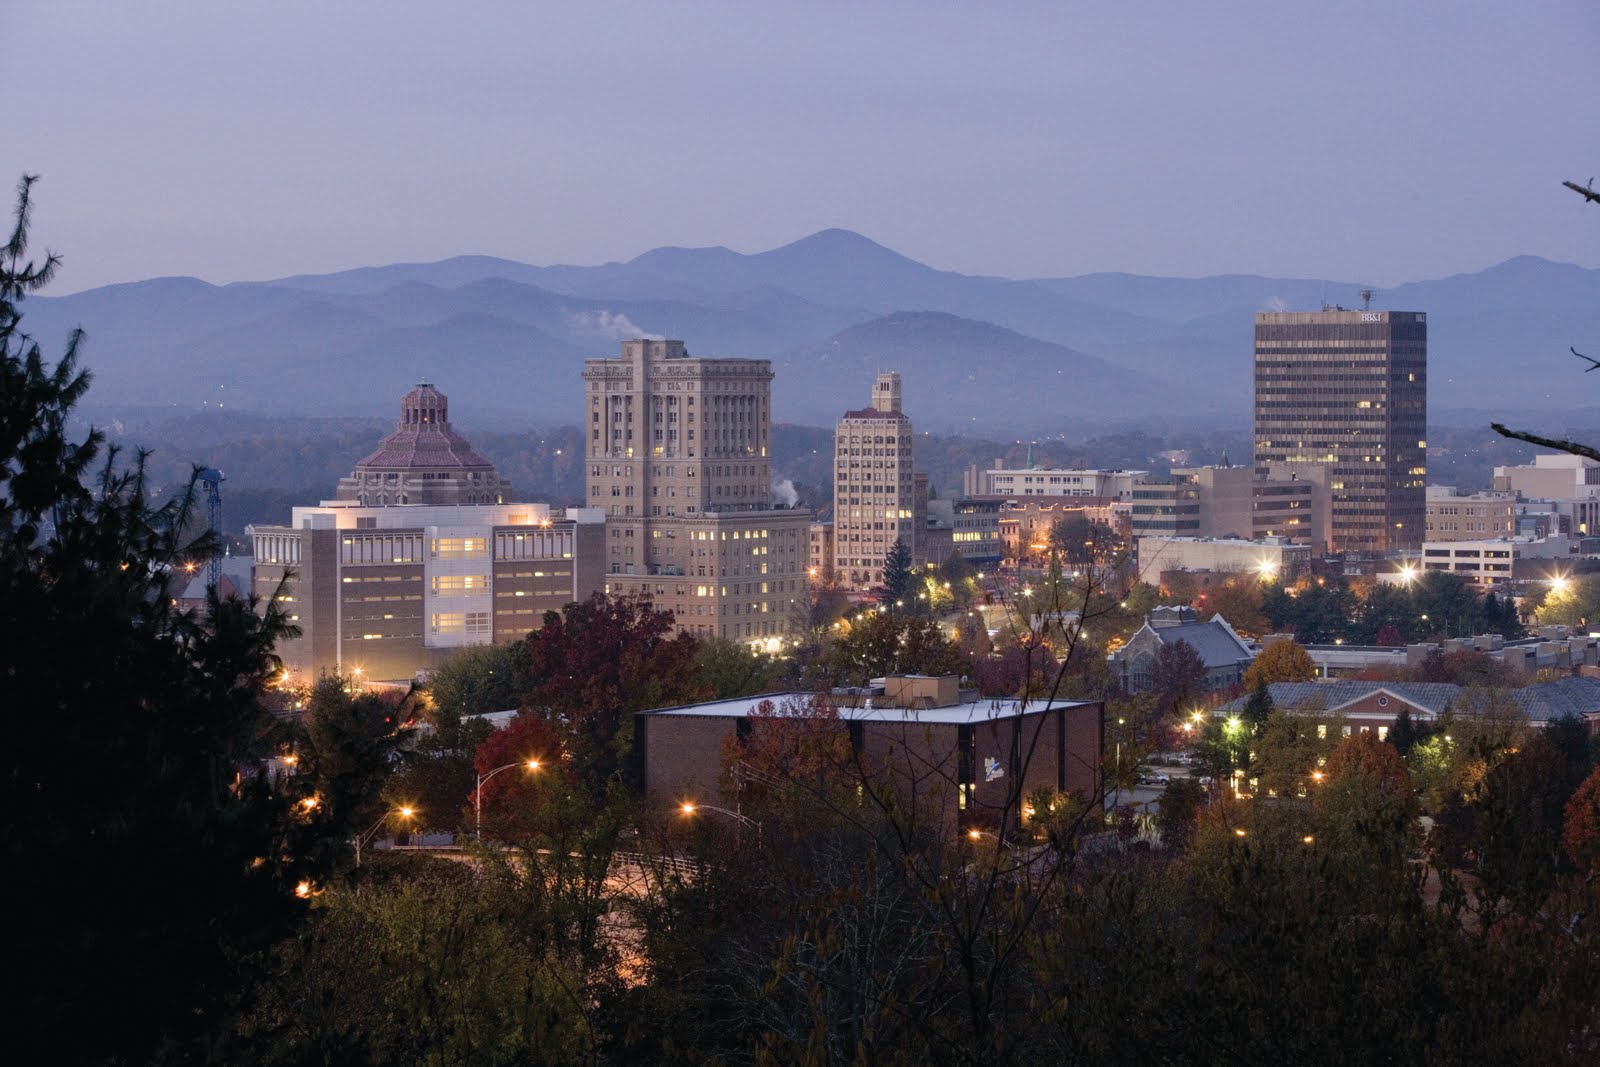 Why President Obama Wanted an Asheville Vacation